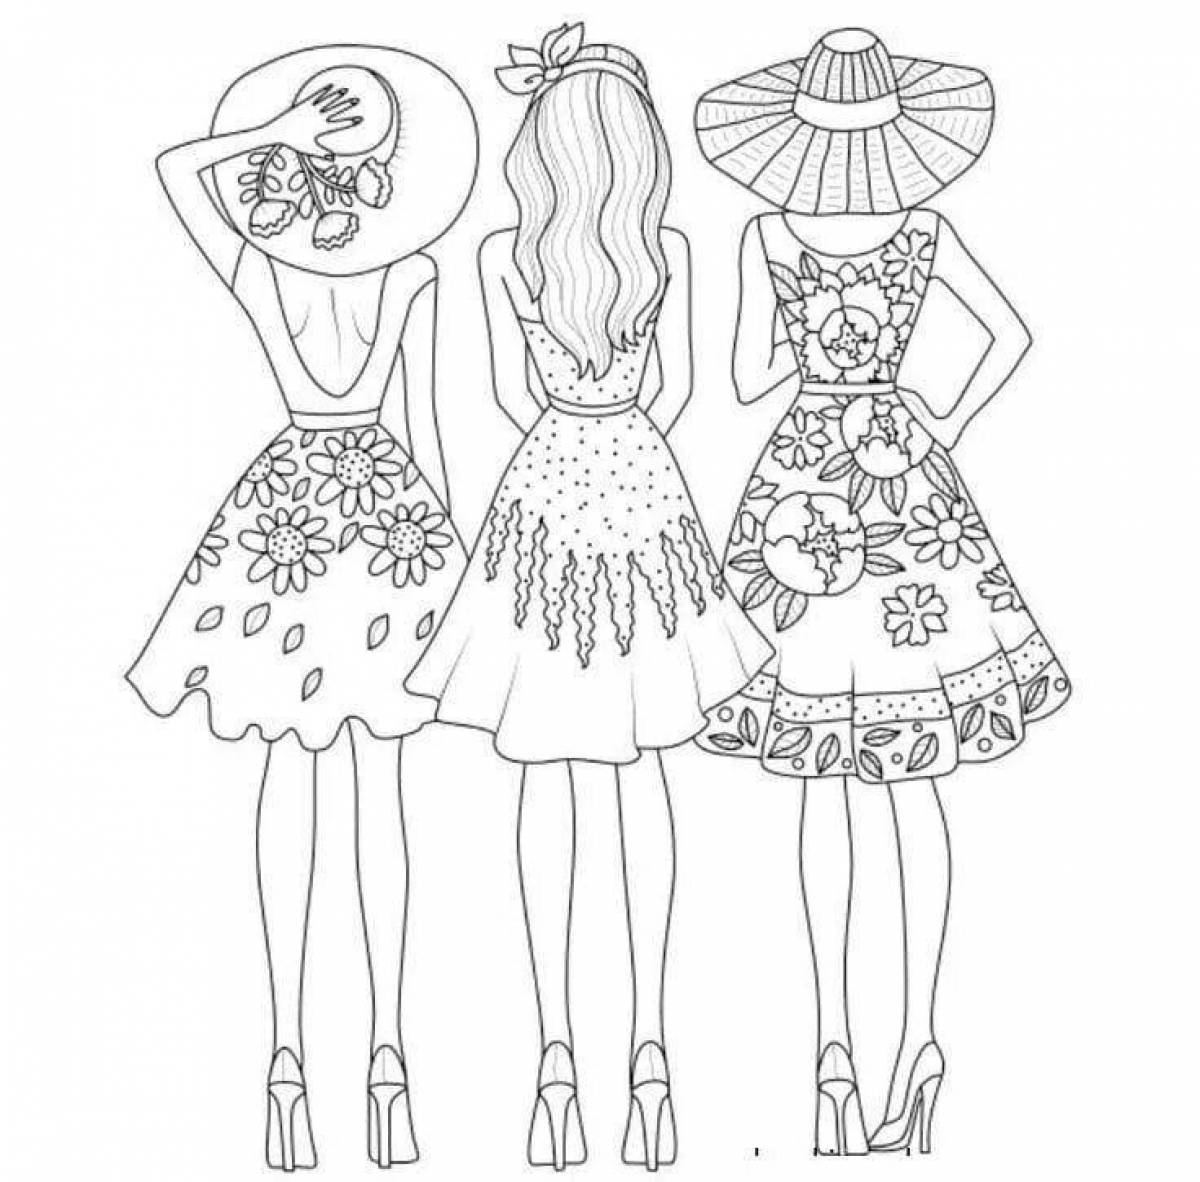 In-style clothing fashion coloring